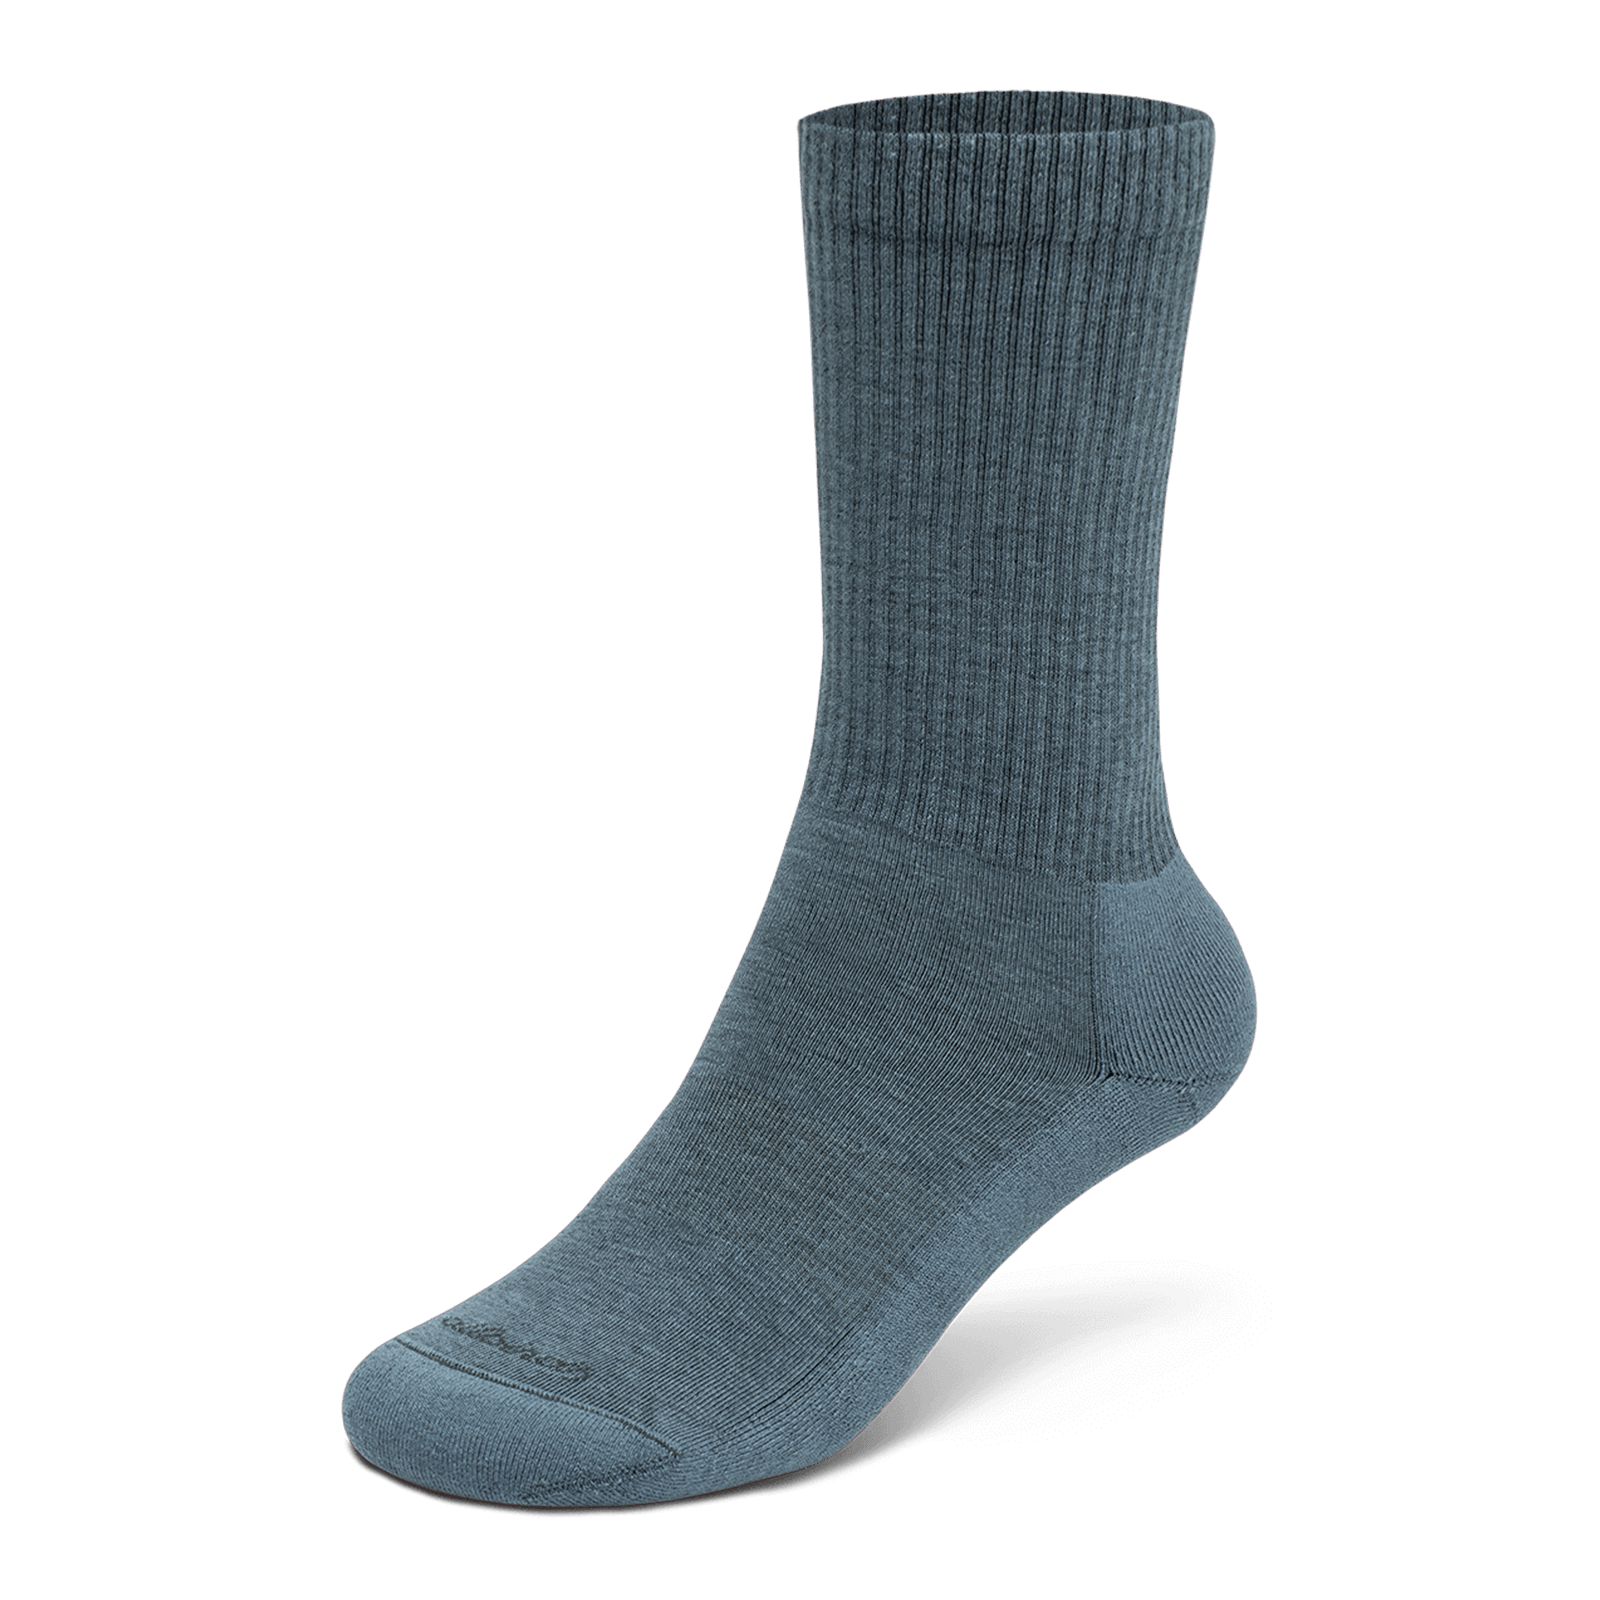 Anytime Crew Sock - Calm Teal